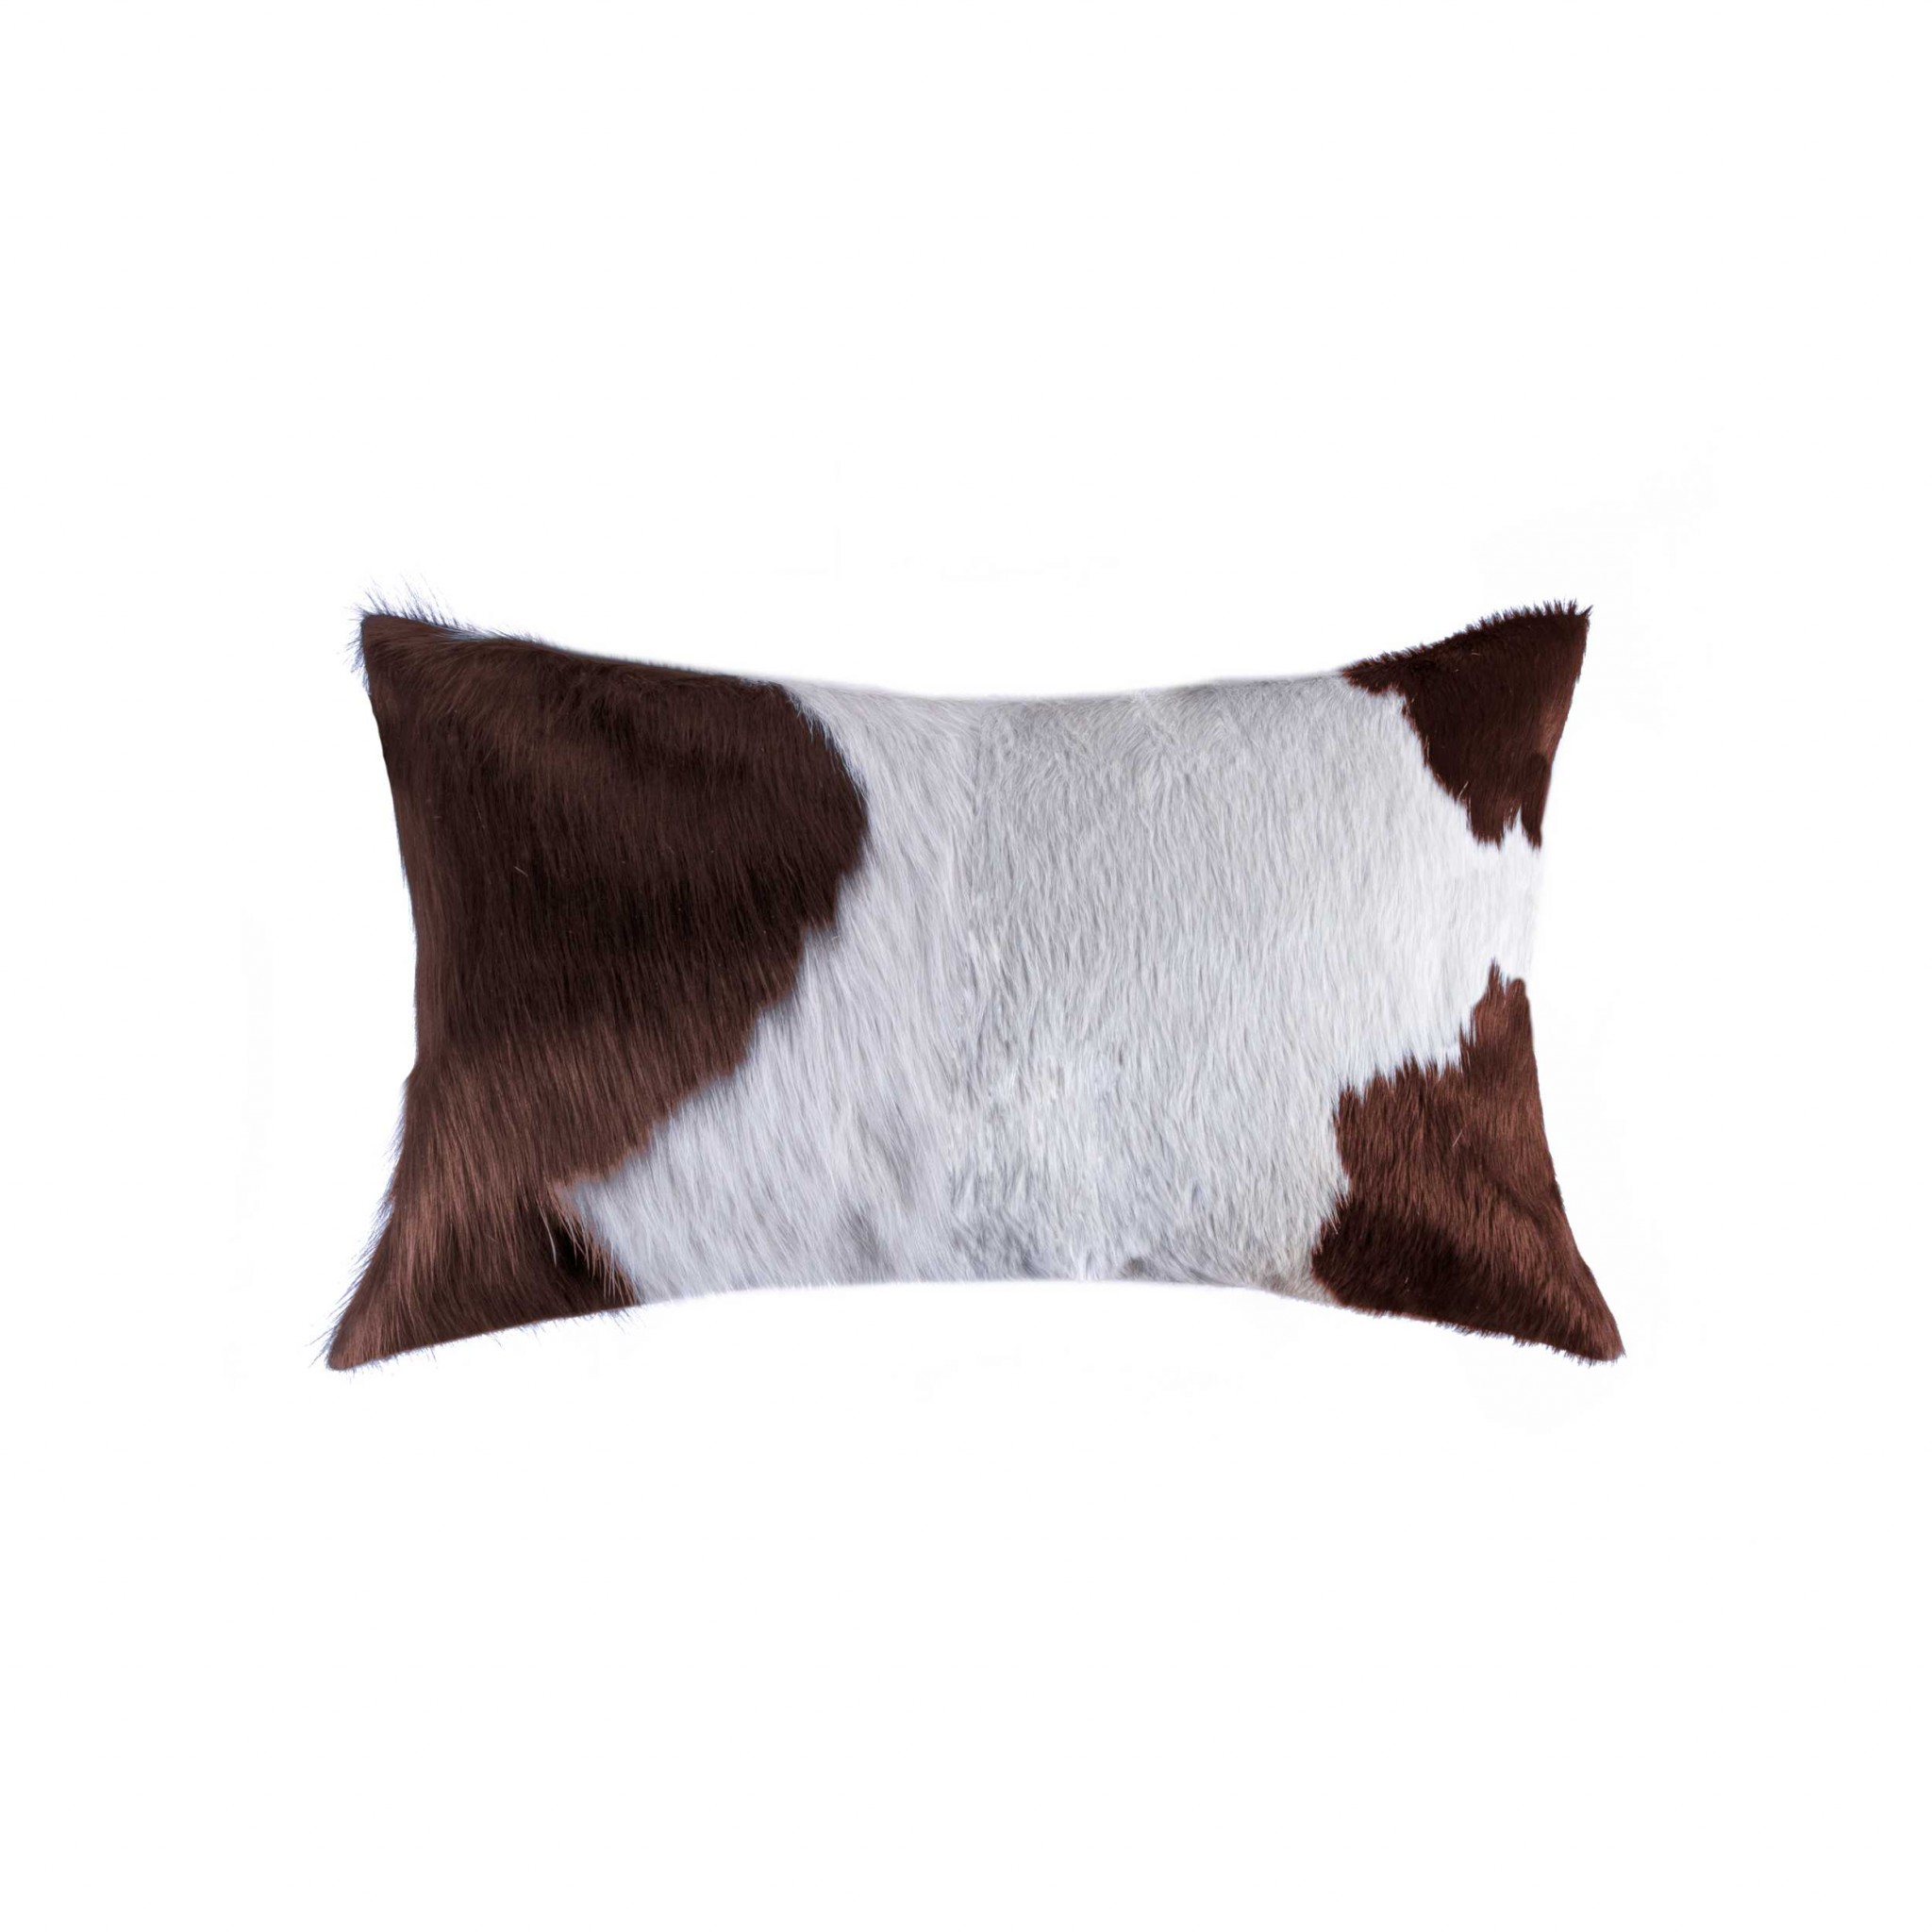 12" x 20" x 5" White And Brown Cowhide - Pillow